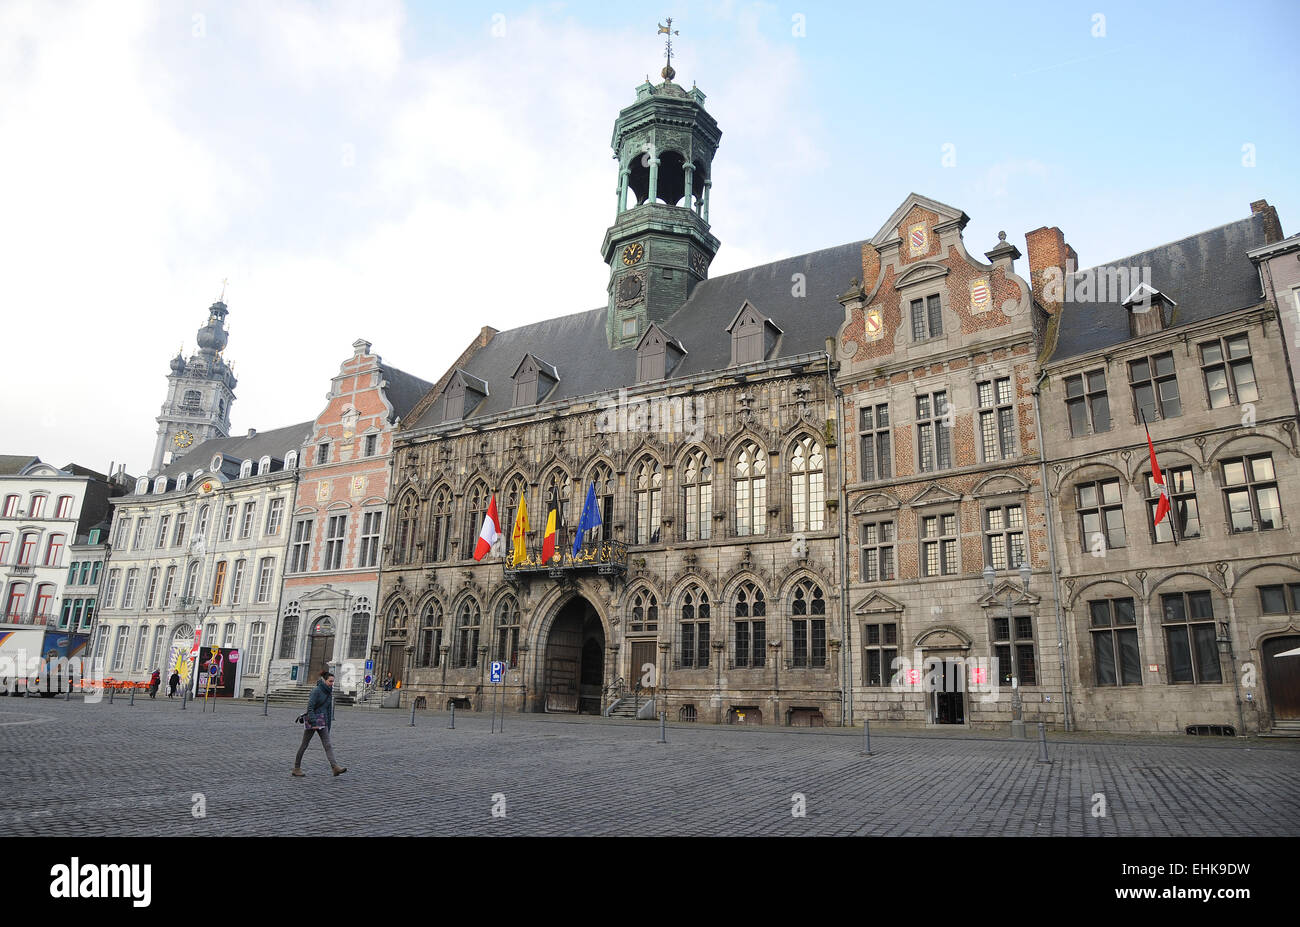 The old square the Grand Place, and the Gothic style City Hall with renaissance period bell tower. Mons, Belgium's cultural city Stock Photo